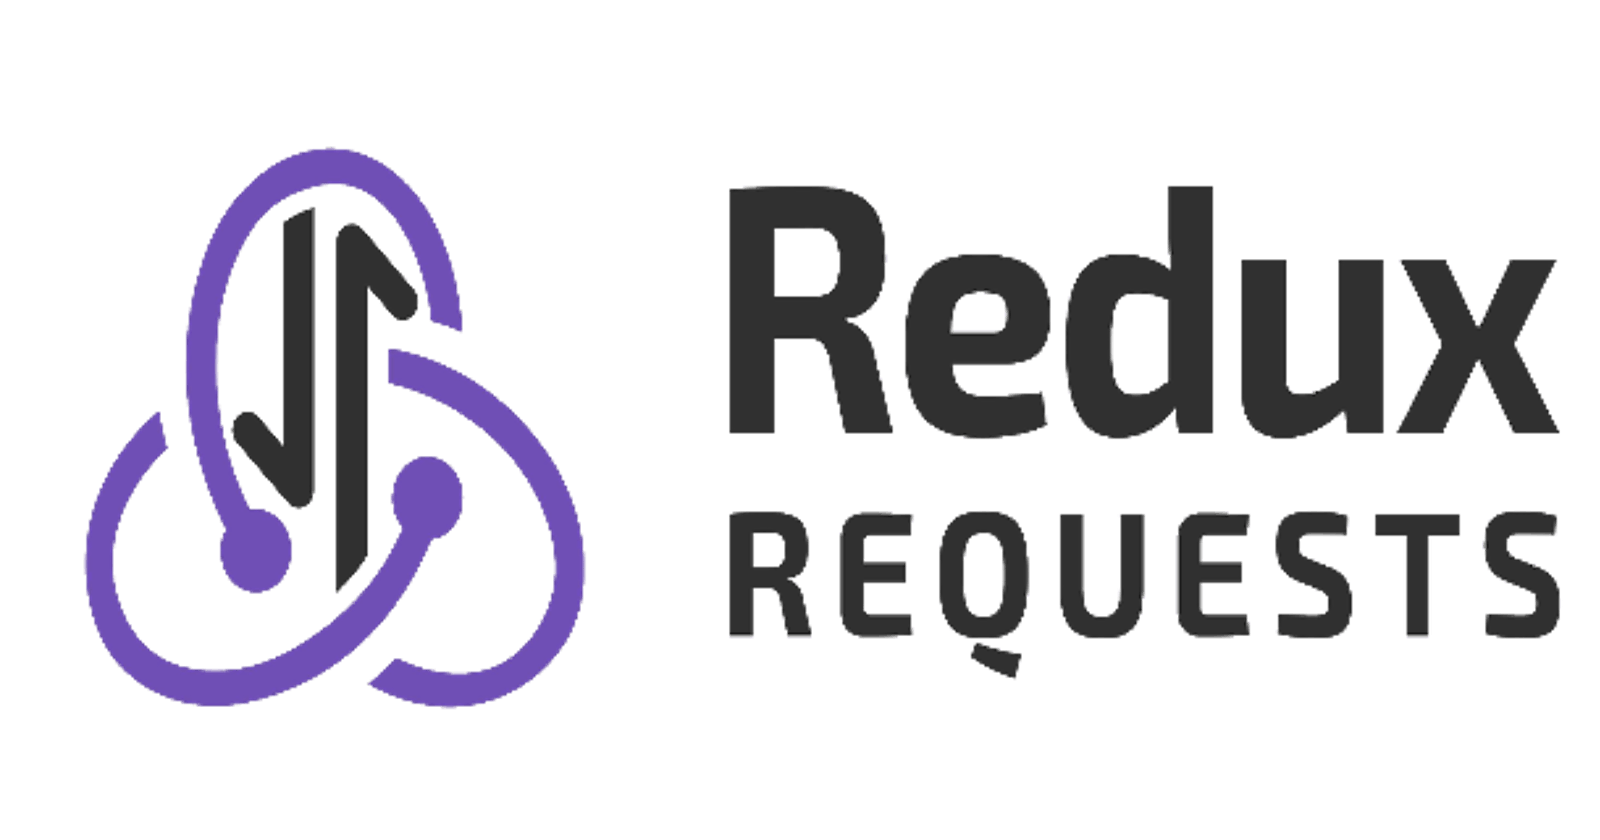 Taming network with redux-requests, part 1 - Introduction